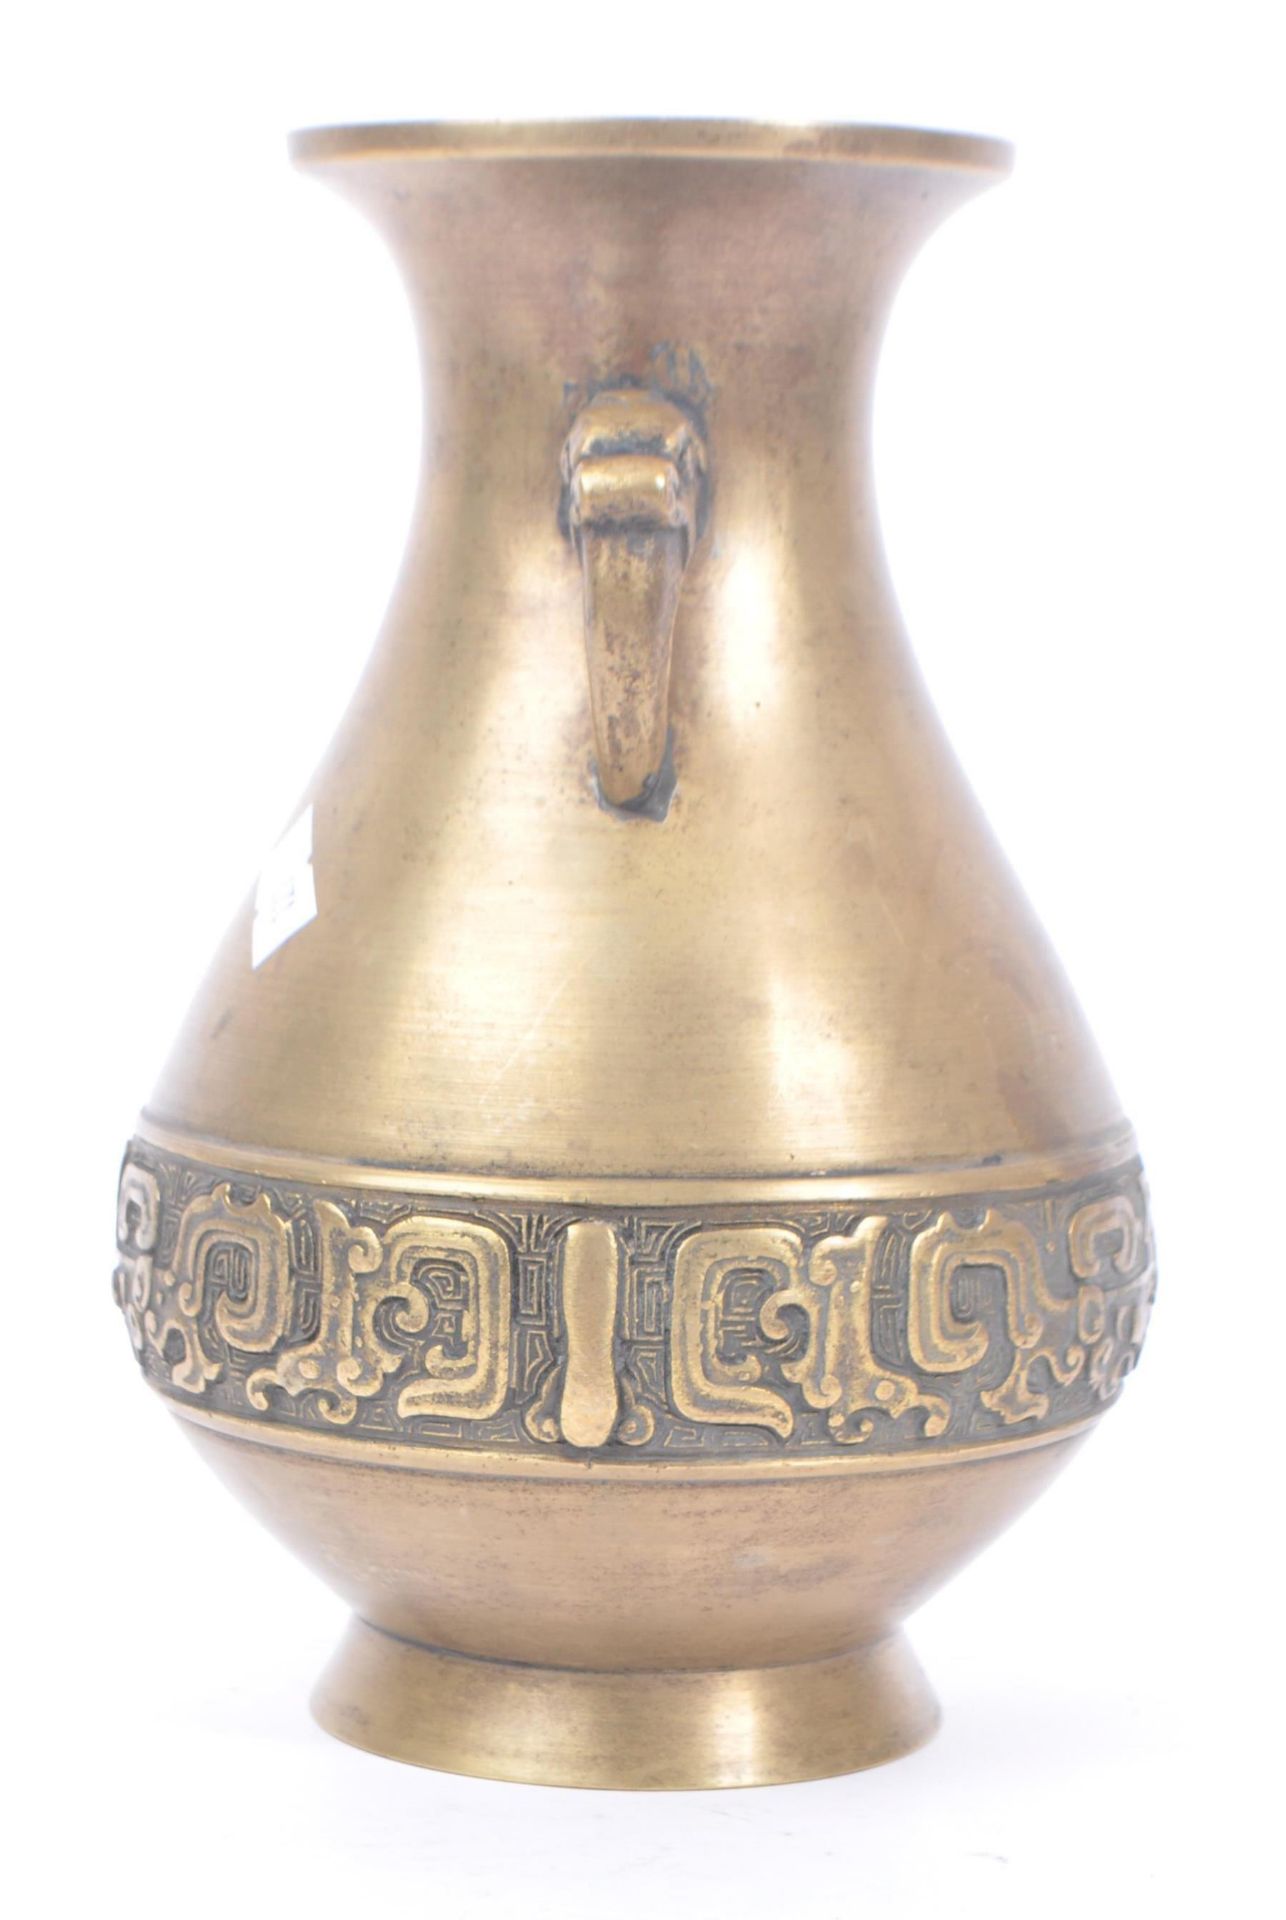 EARLY 20TH CENTURY CHINESE BRASS VASE - Image 2 of 6